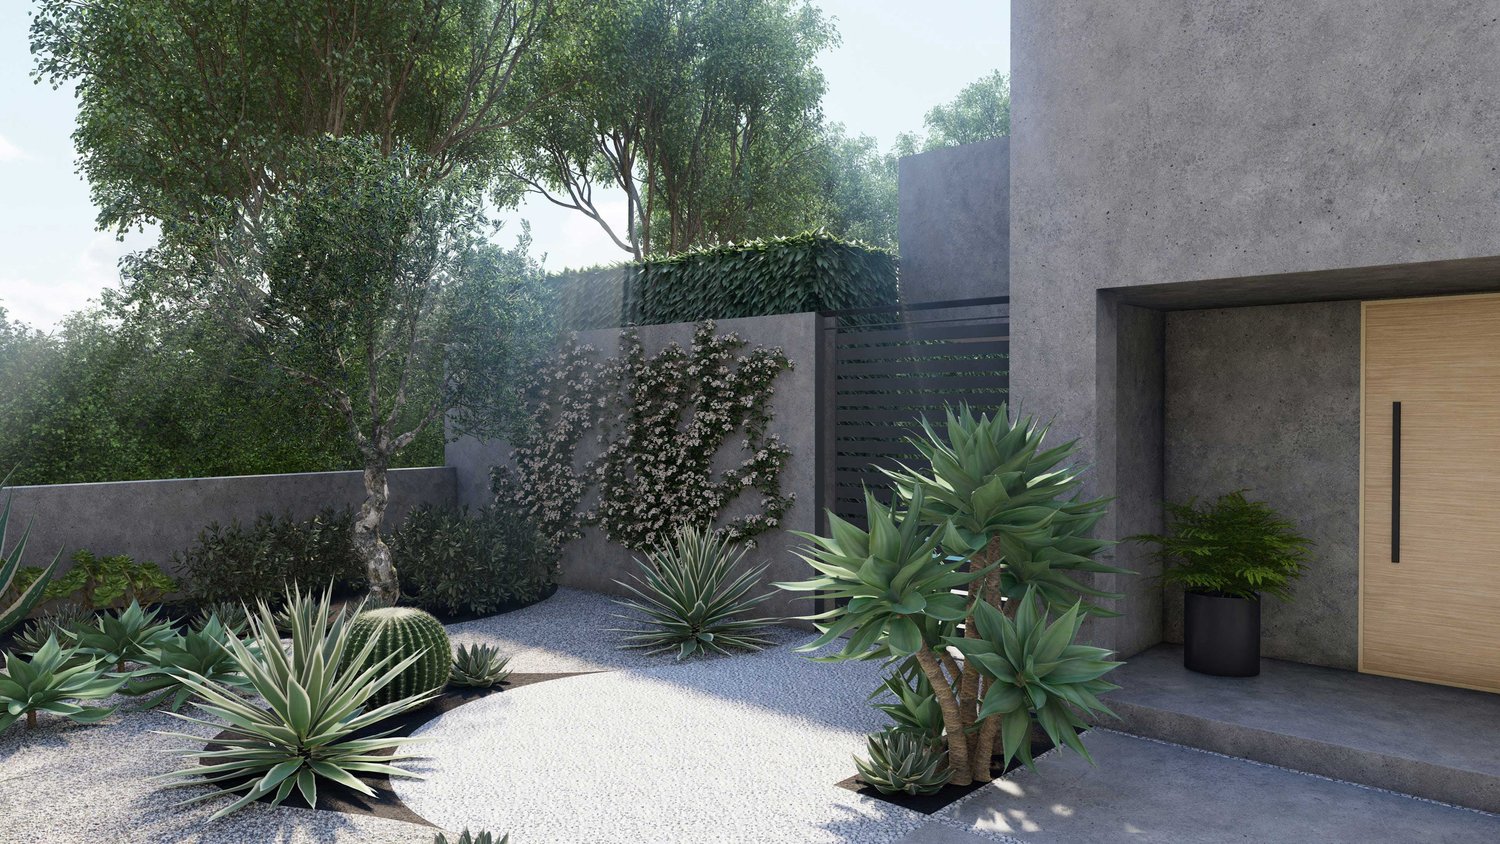 Los Angeles gravel front yard with drought tolerant plants, trees, wall plants, hedge fence and planter